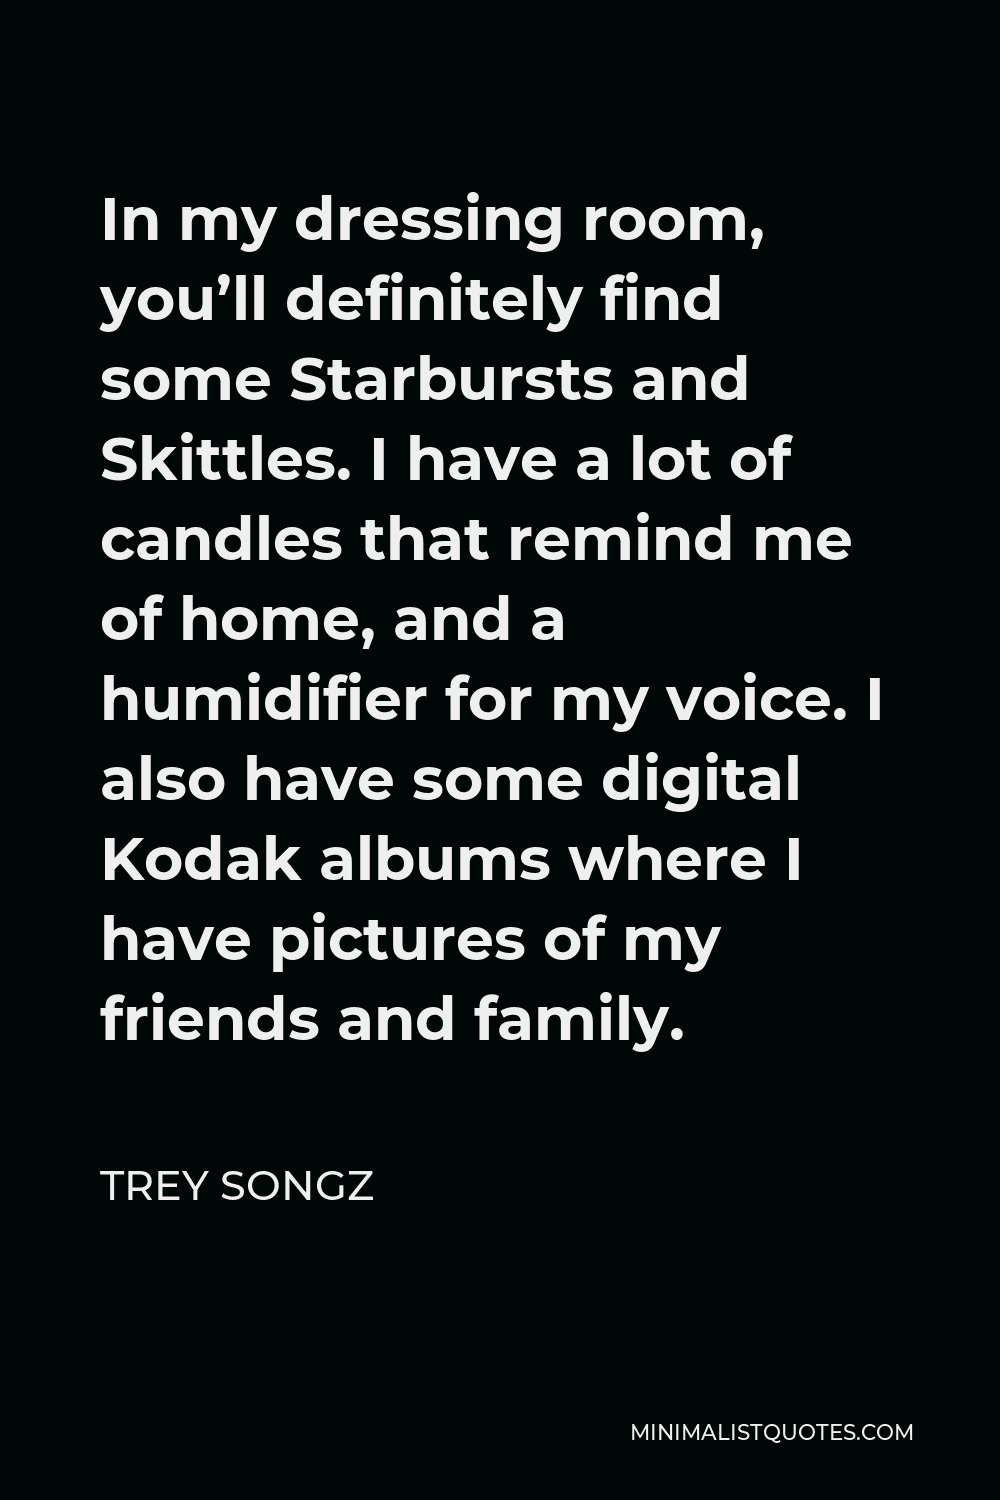 Trey Songz Quote - In my dressing room, you’ll definitely find some Starbursts and Skittles. I have a lot of candles that remind me of home, and a humidifier for my voice. I also have some digital Kodak albums where I have pictures of my friends and family.